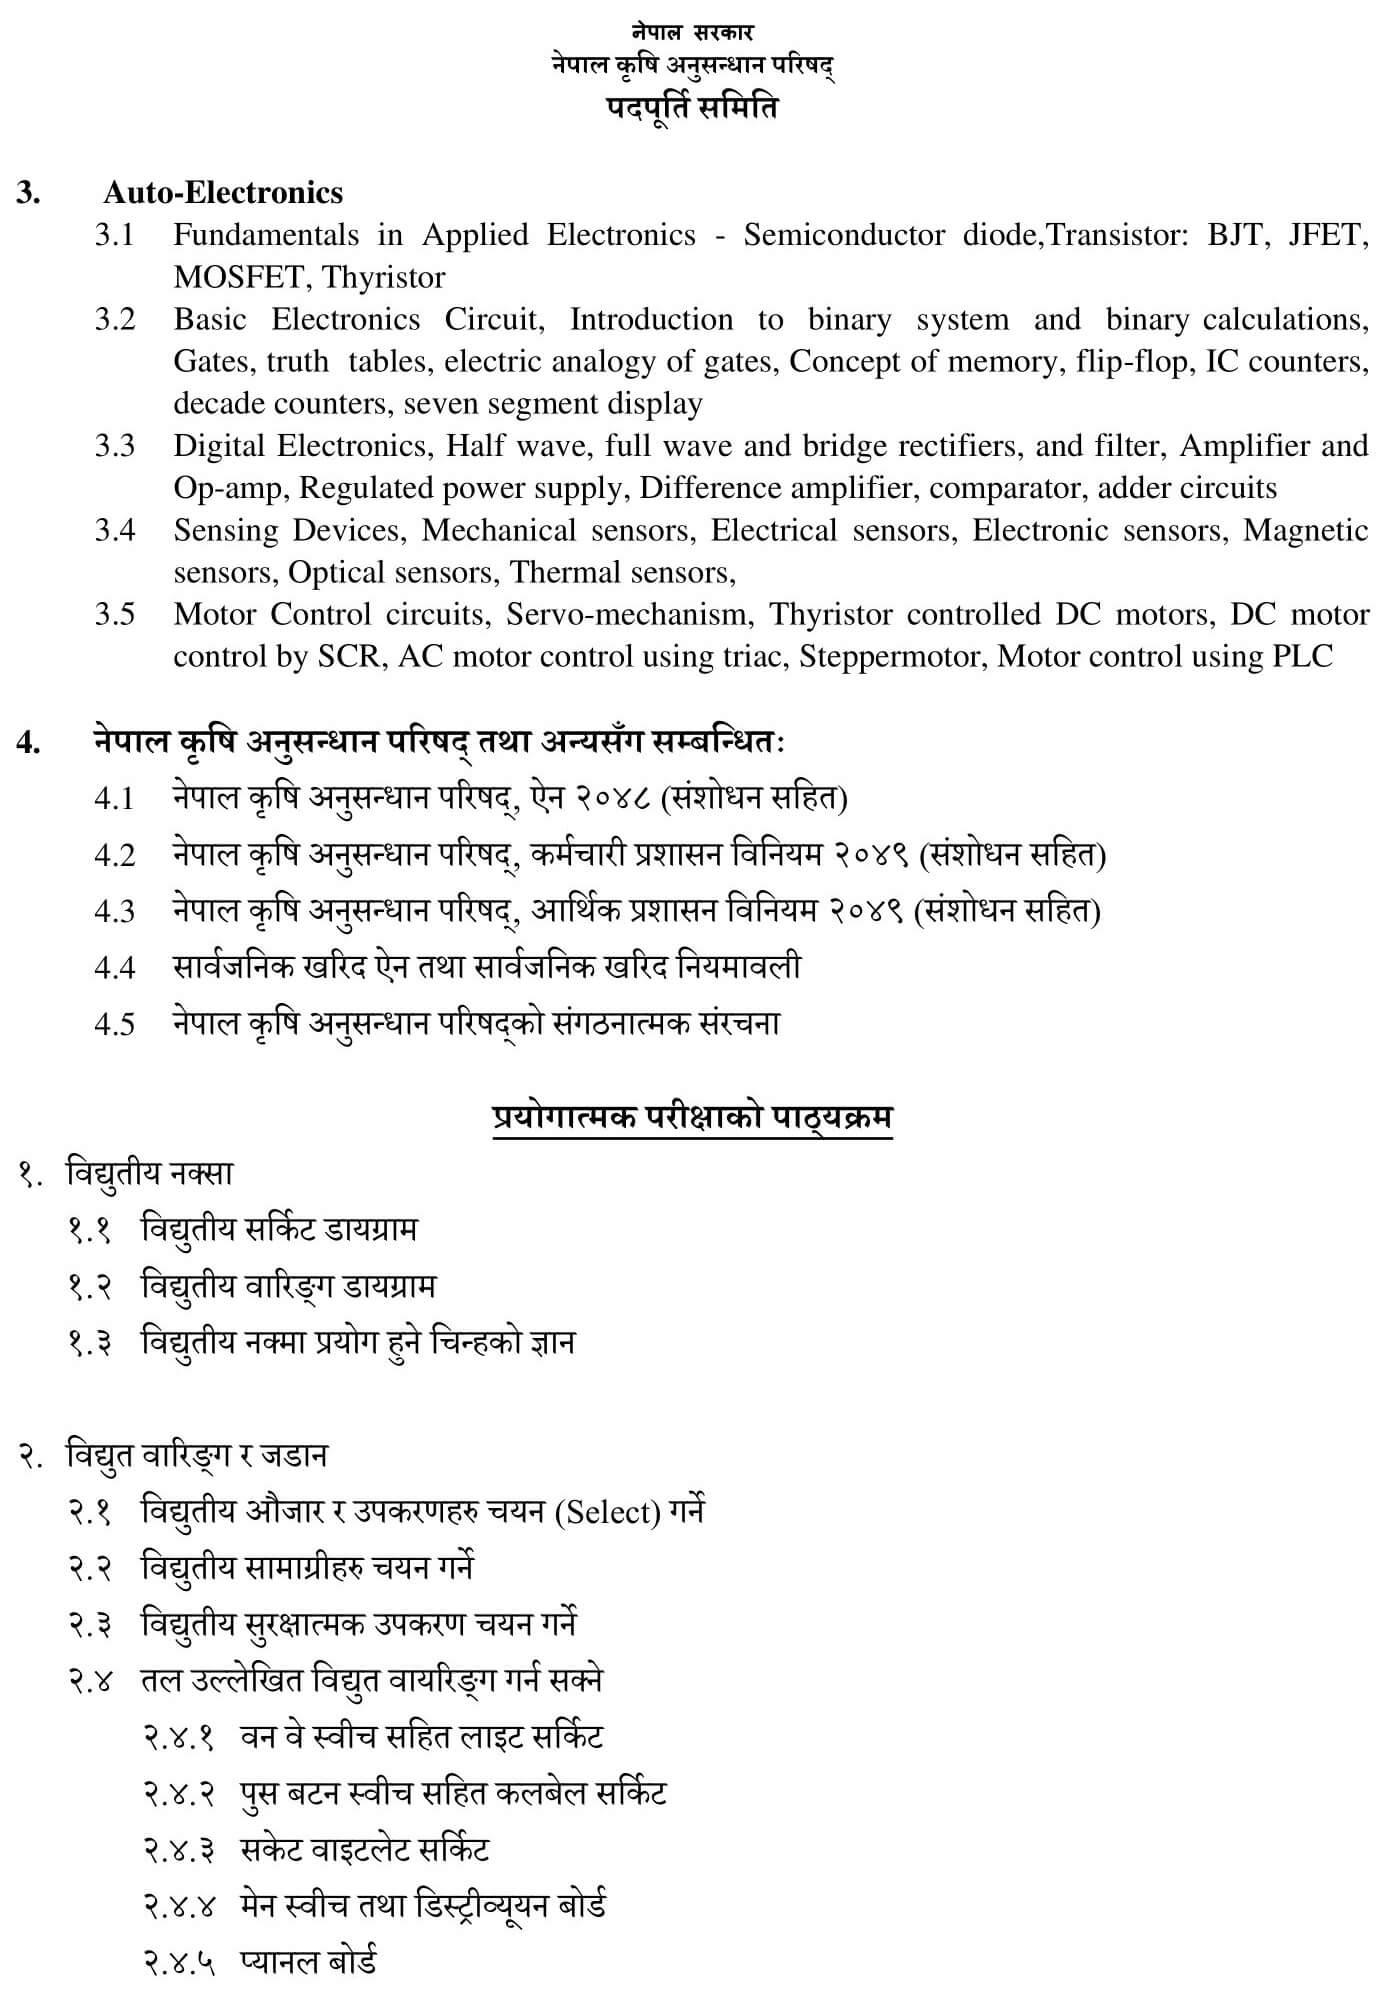 Nepal Agricultural Research Council Level 5 Electrician Syllabus. NARC Level 5 Electrician Syllabus. NARC Syllabus PDF